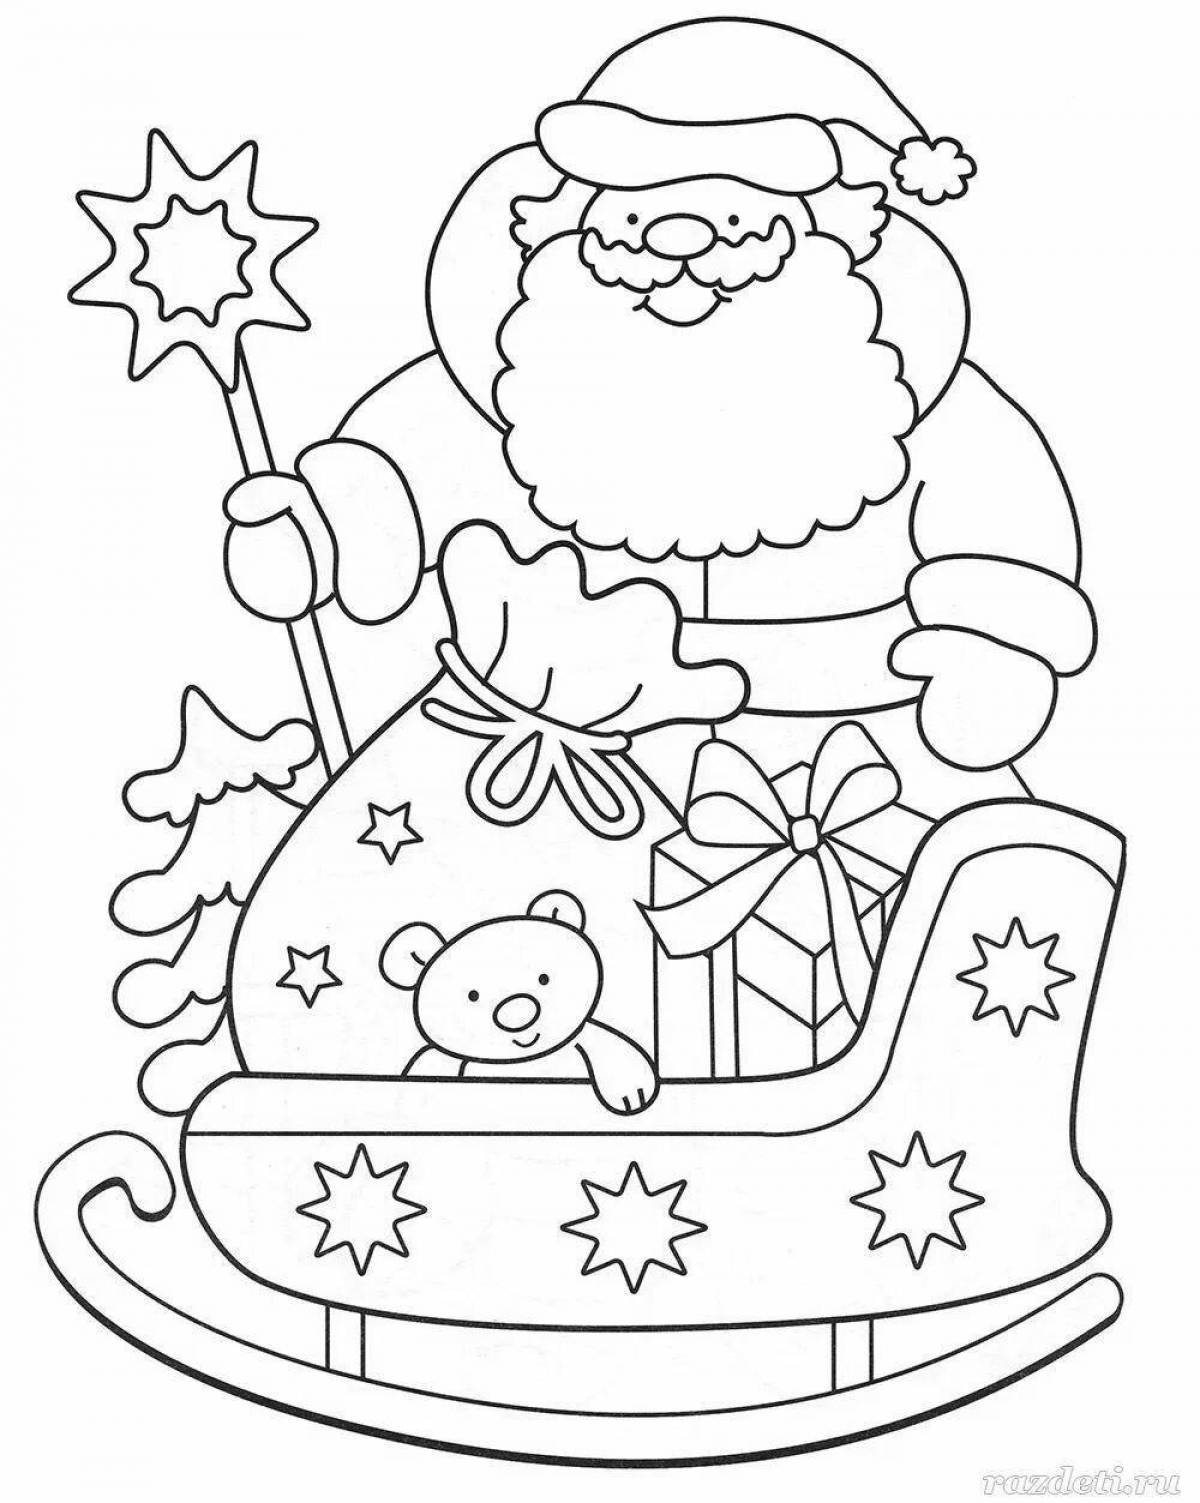 Colorful Christmas coloring book for kids